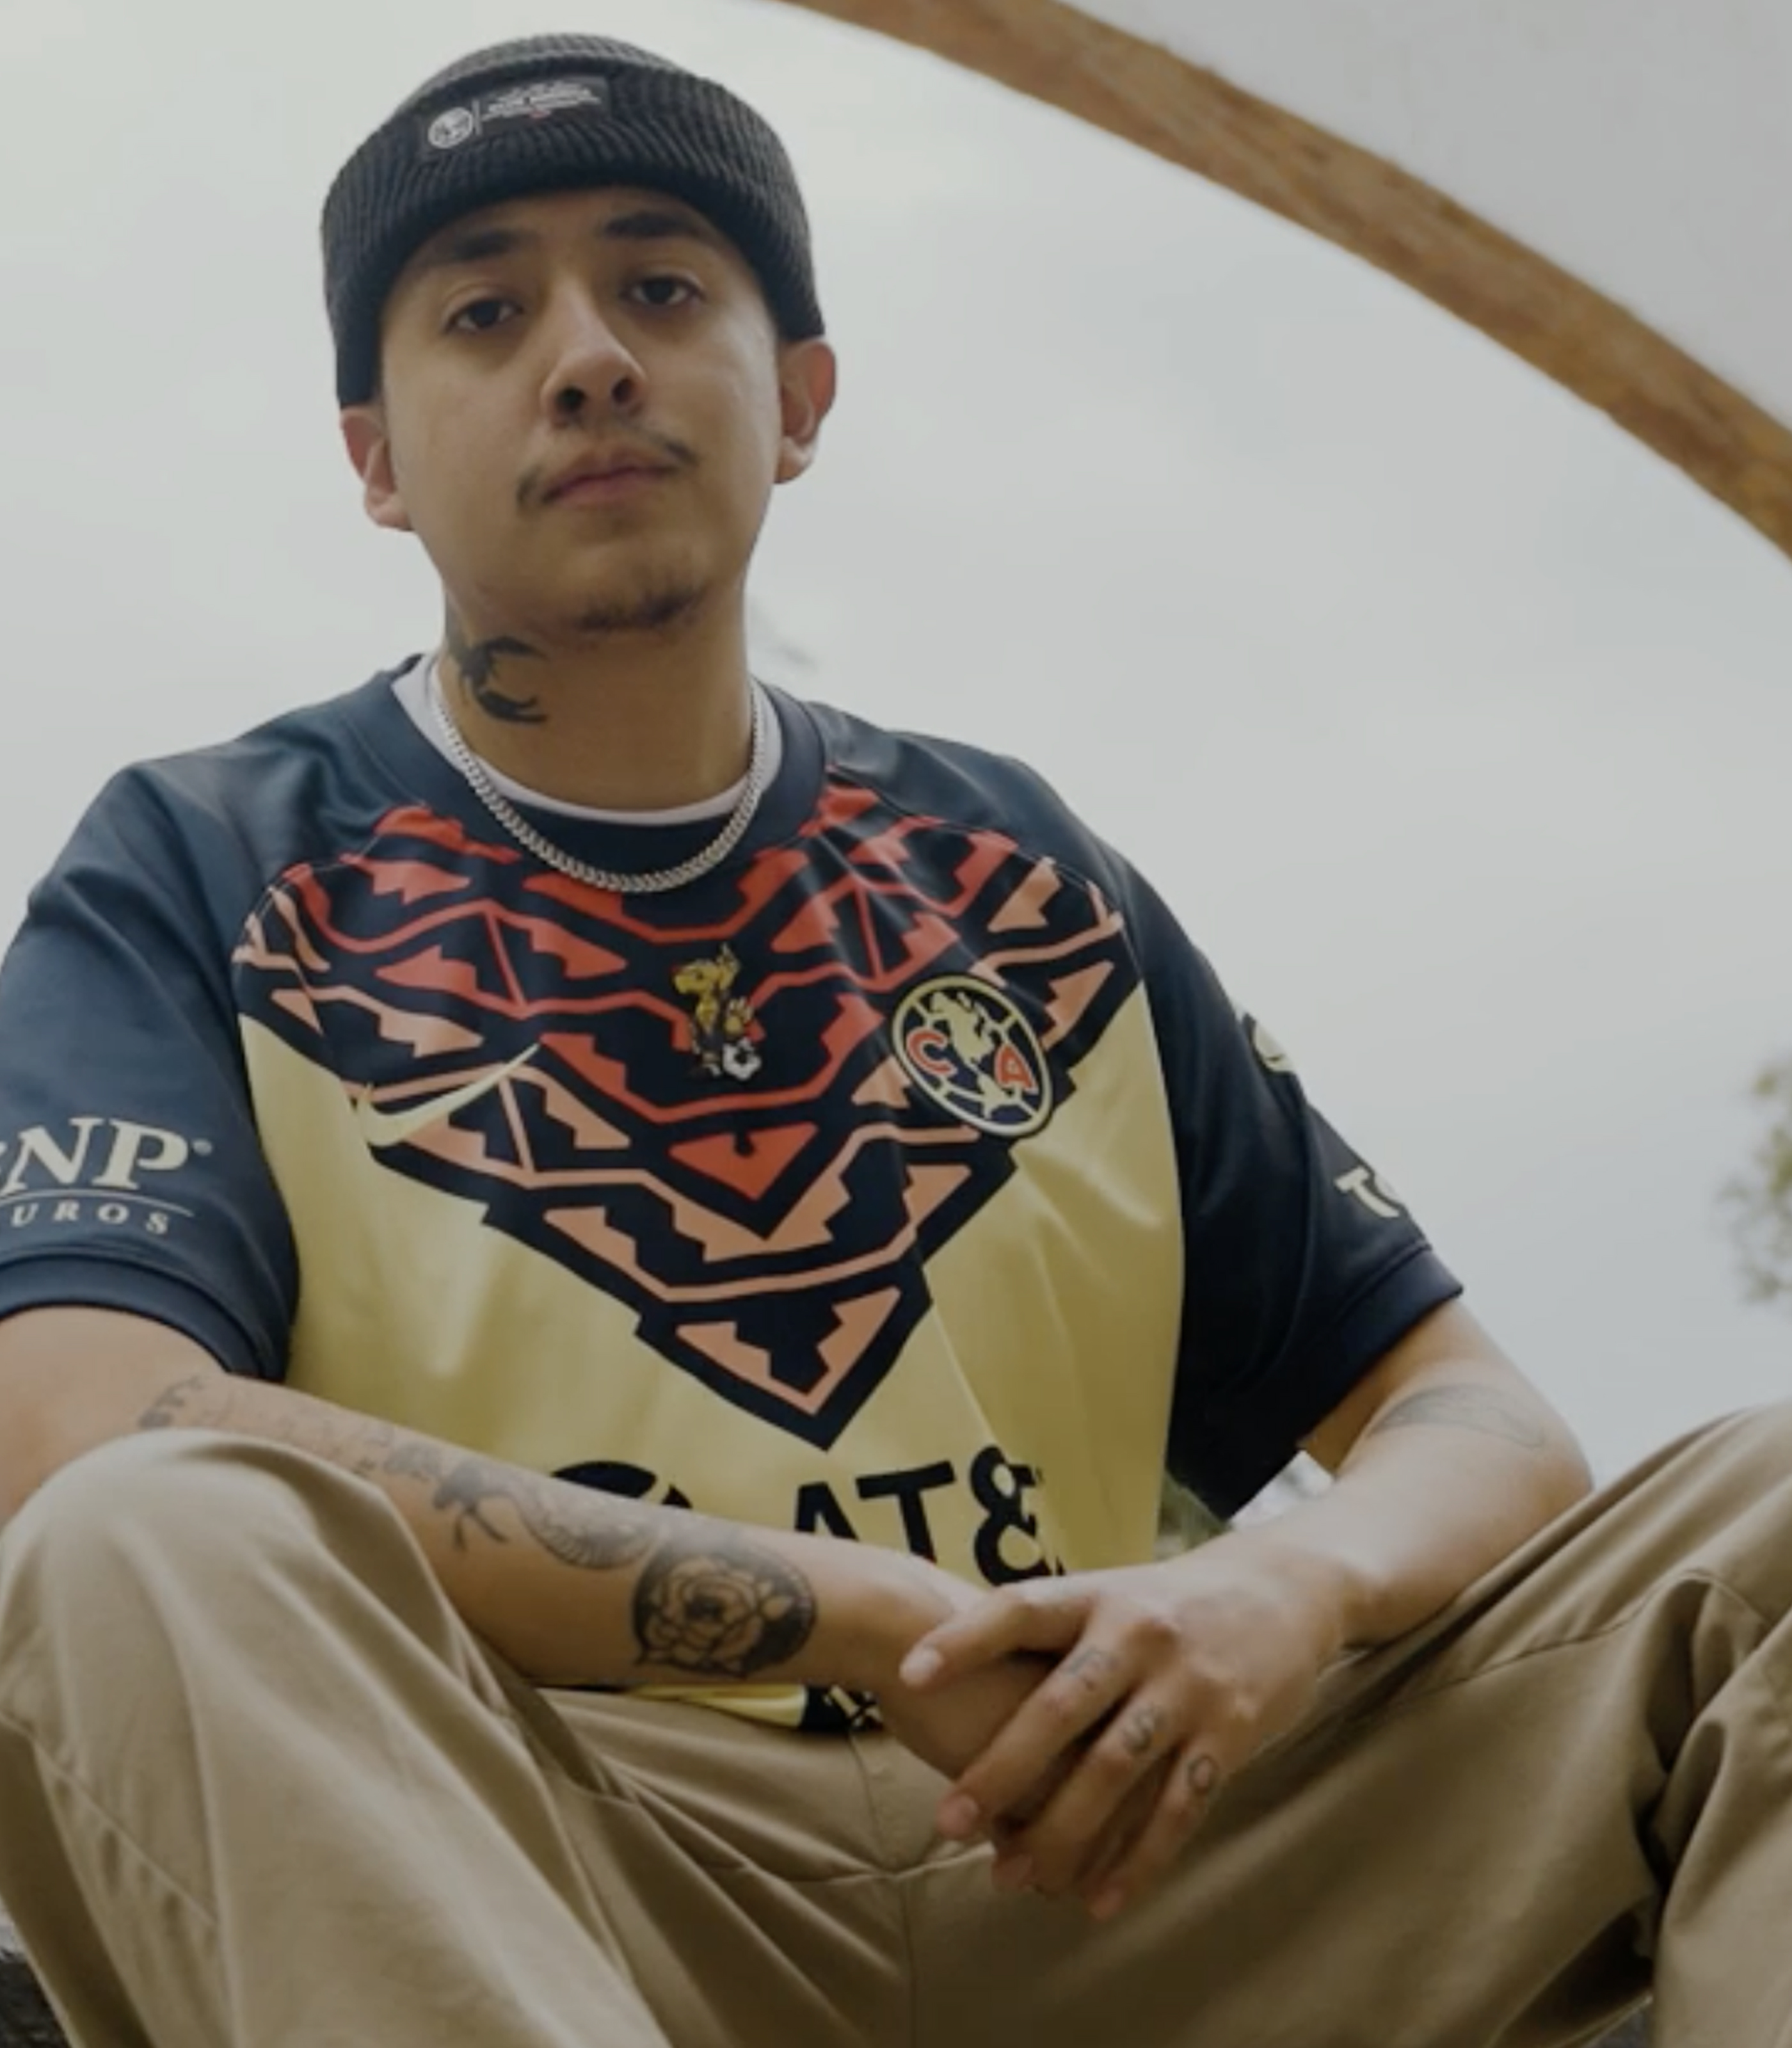 Cuco for Club América and Niky's Sports 